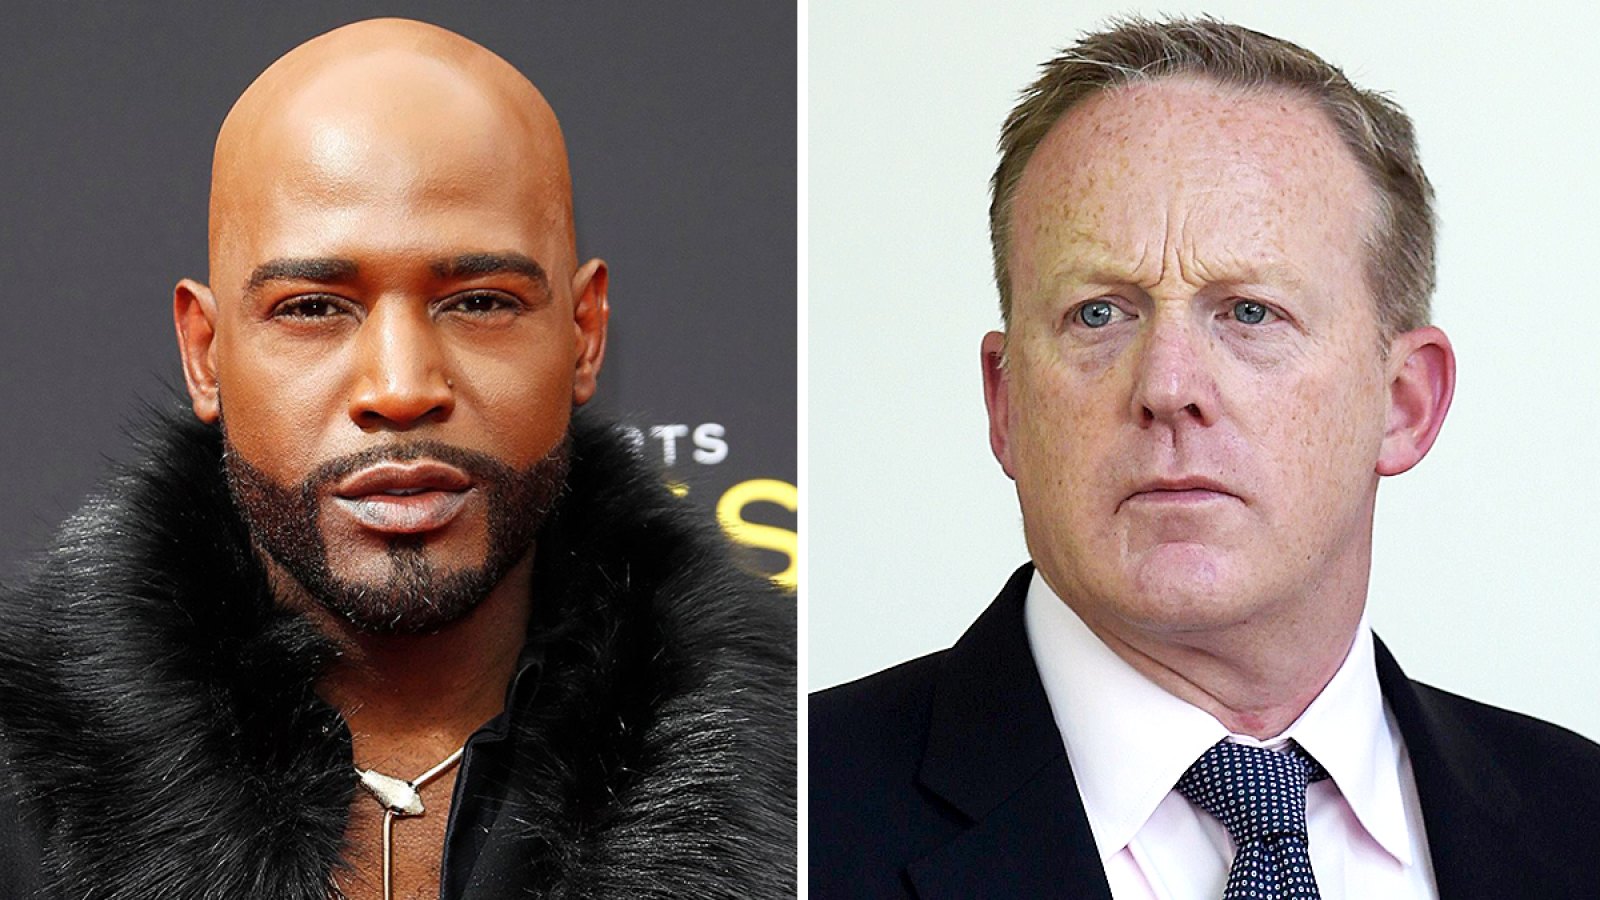 Karamo-Brown-Says-His-Sons-Received-Death-Threats-After-His-Sean-Spicer-Comments